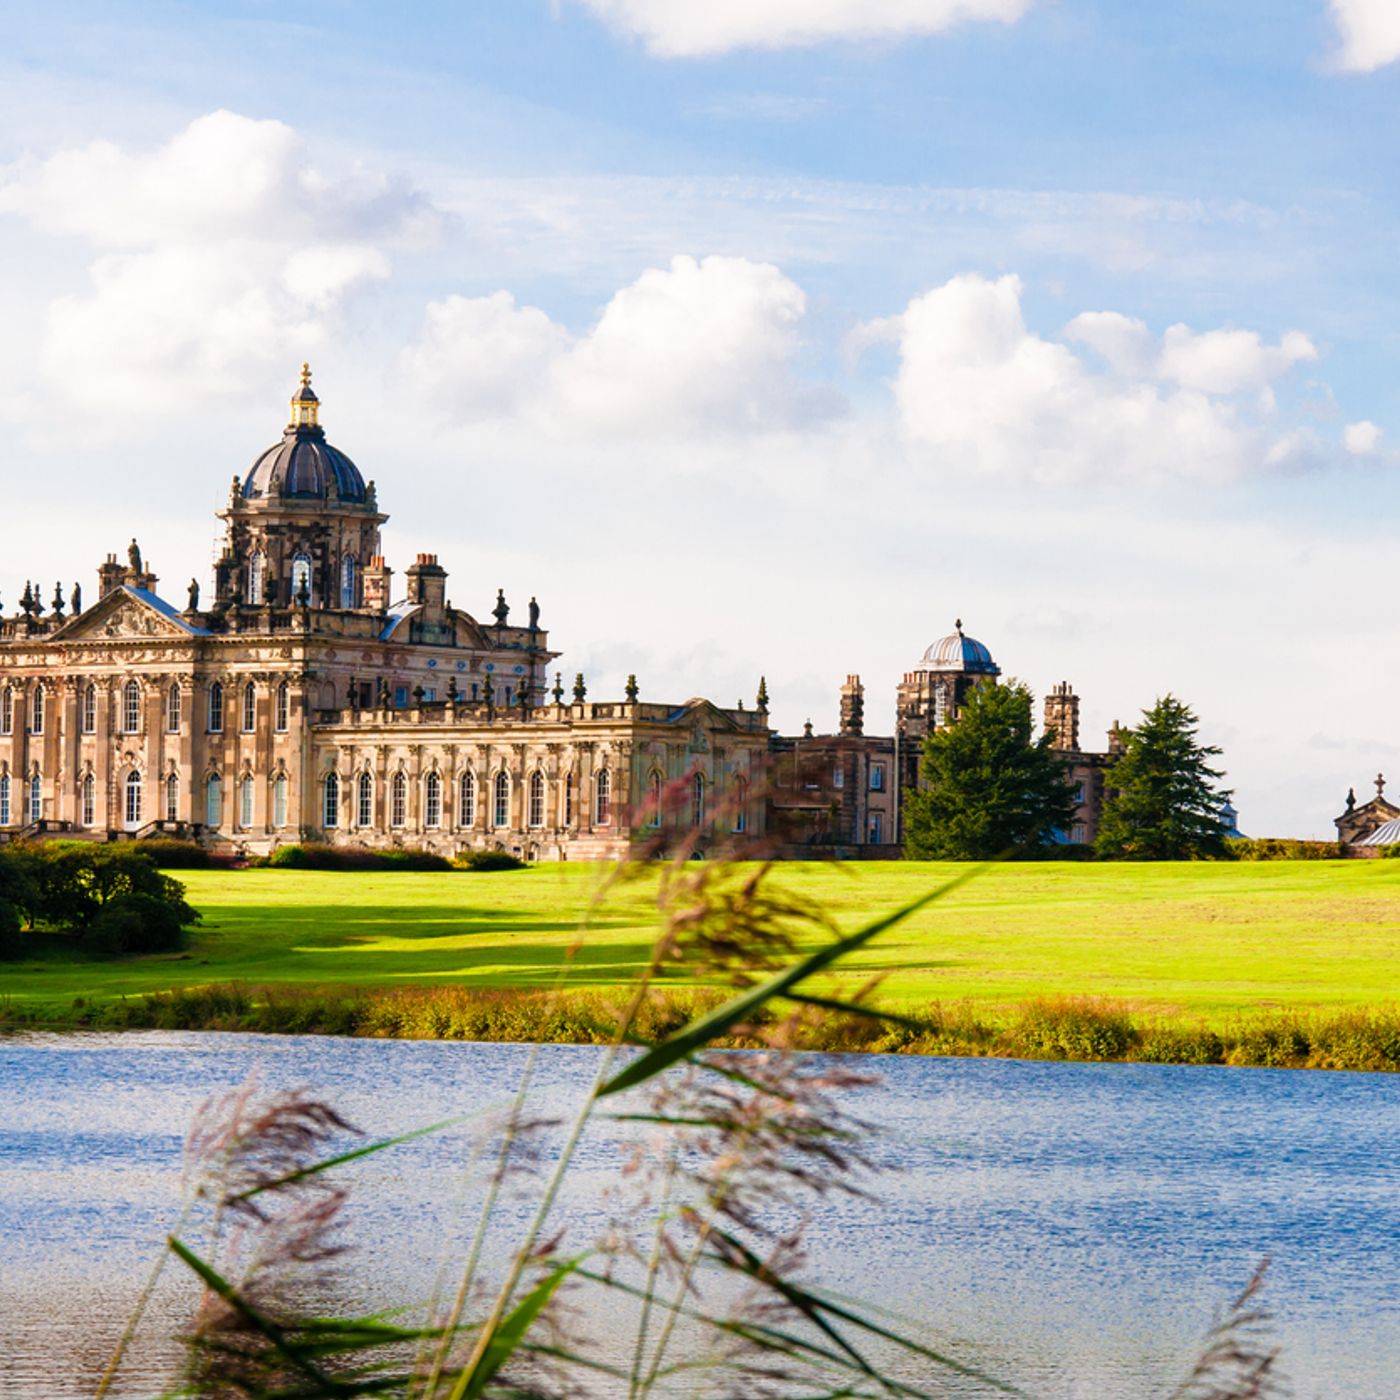 The 75th anniversary of Brideshead Revisited